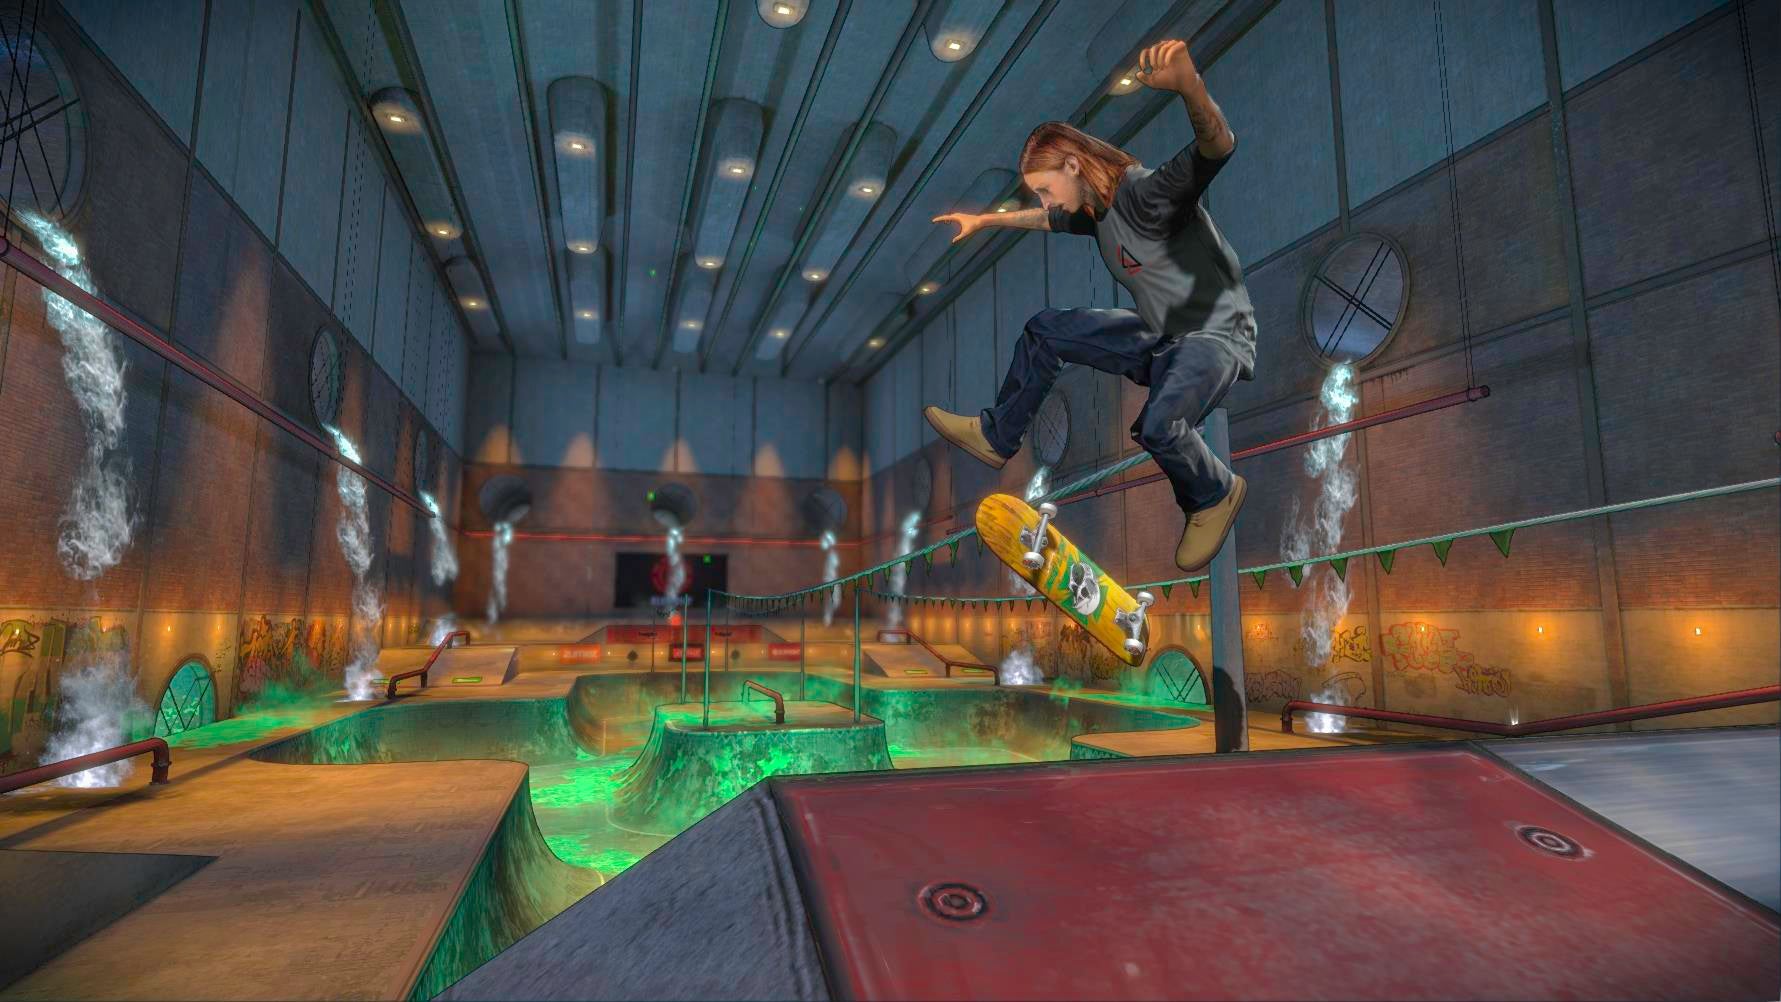 Image for Tony Hawk's Pro Skater 5 changes art style, somehow manages to look worse